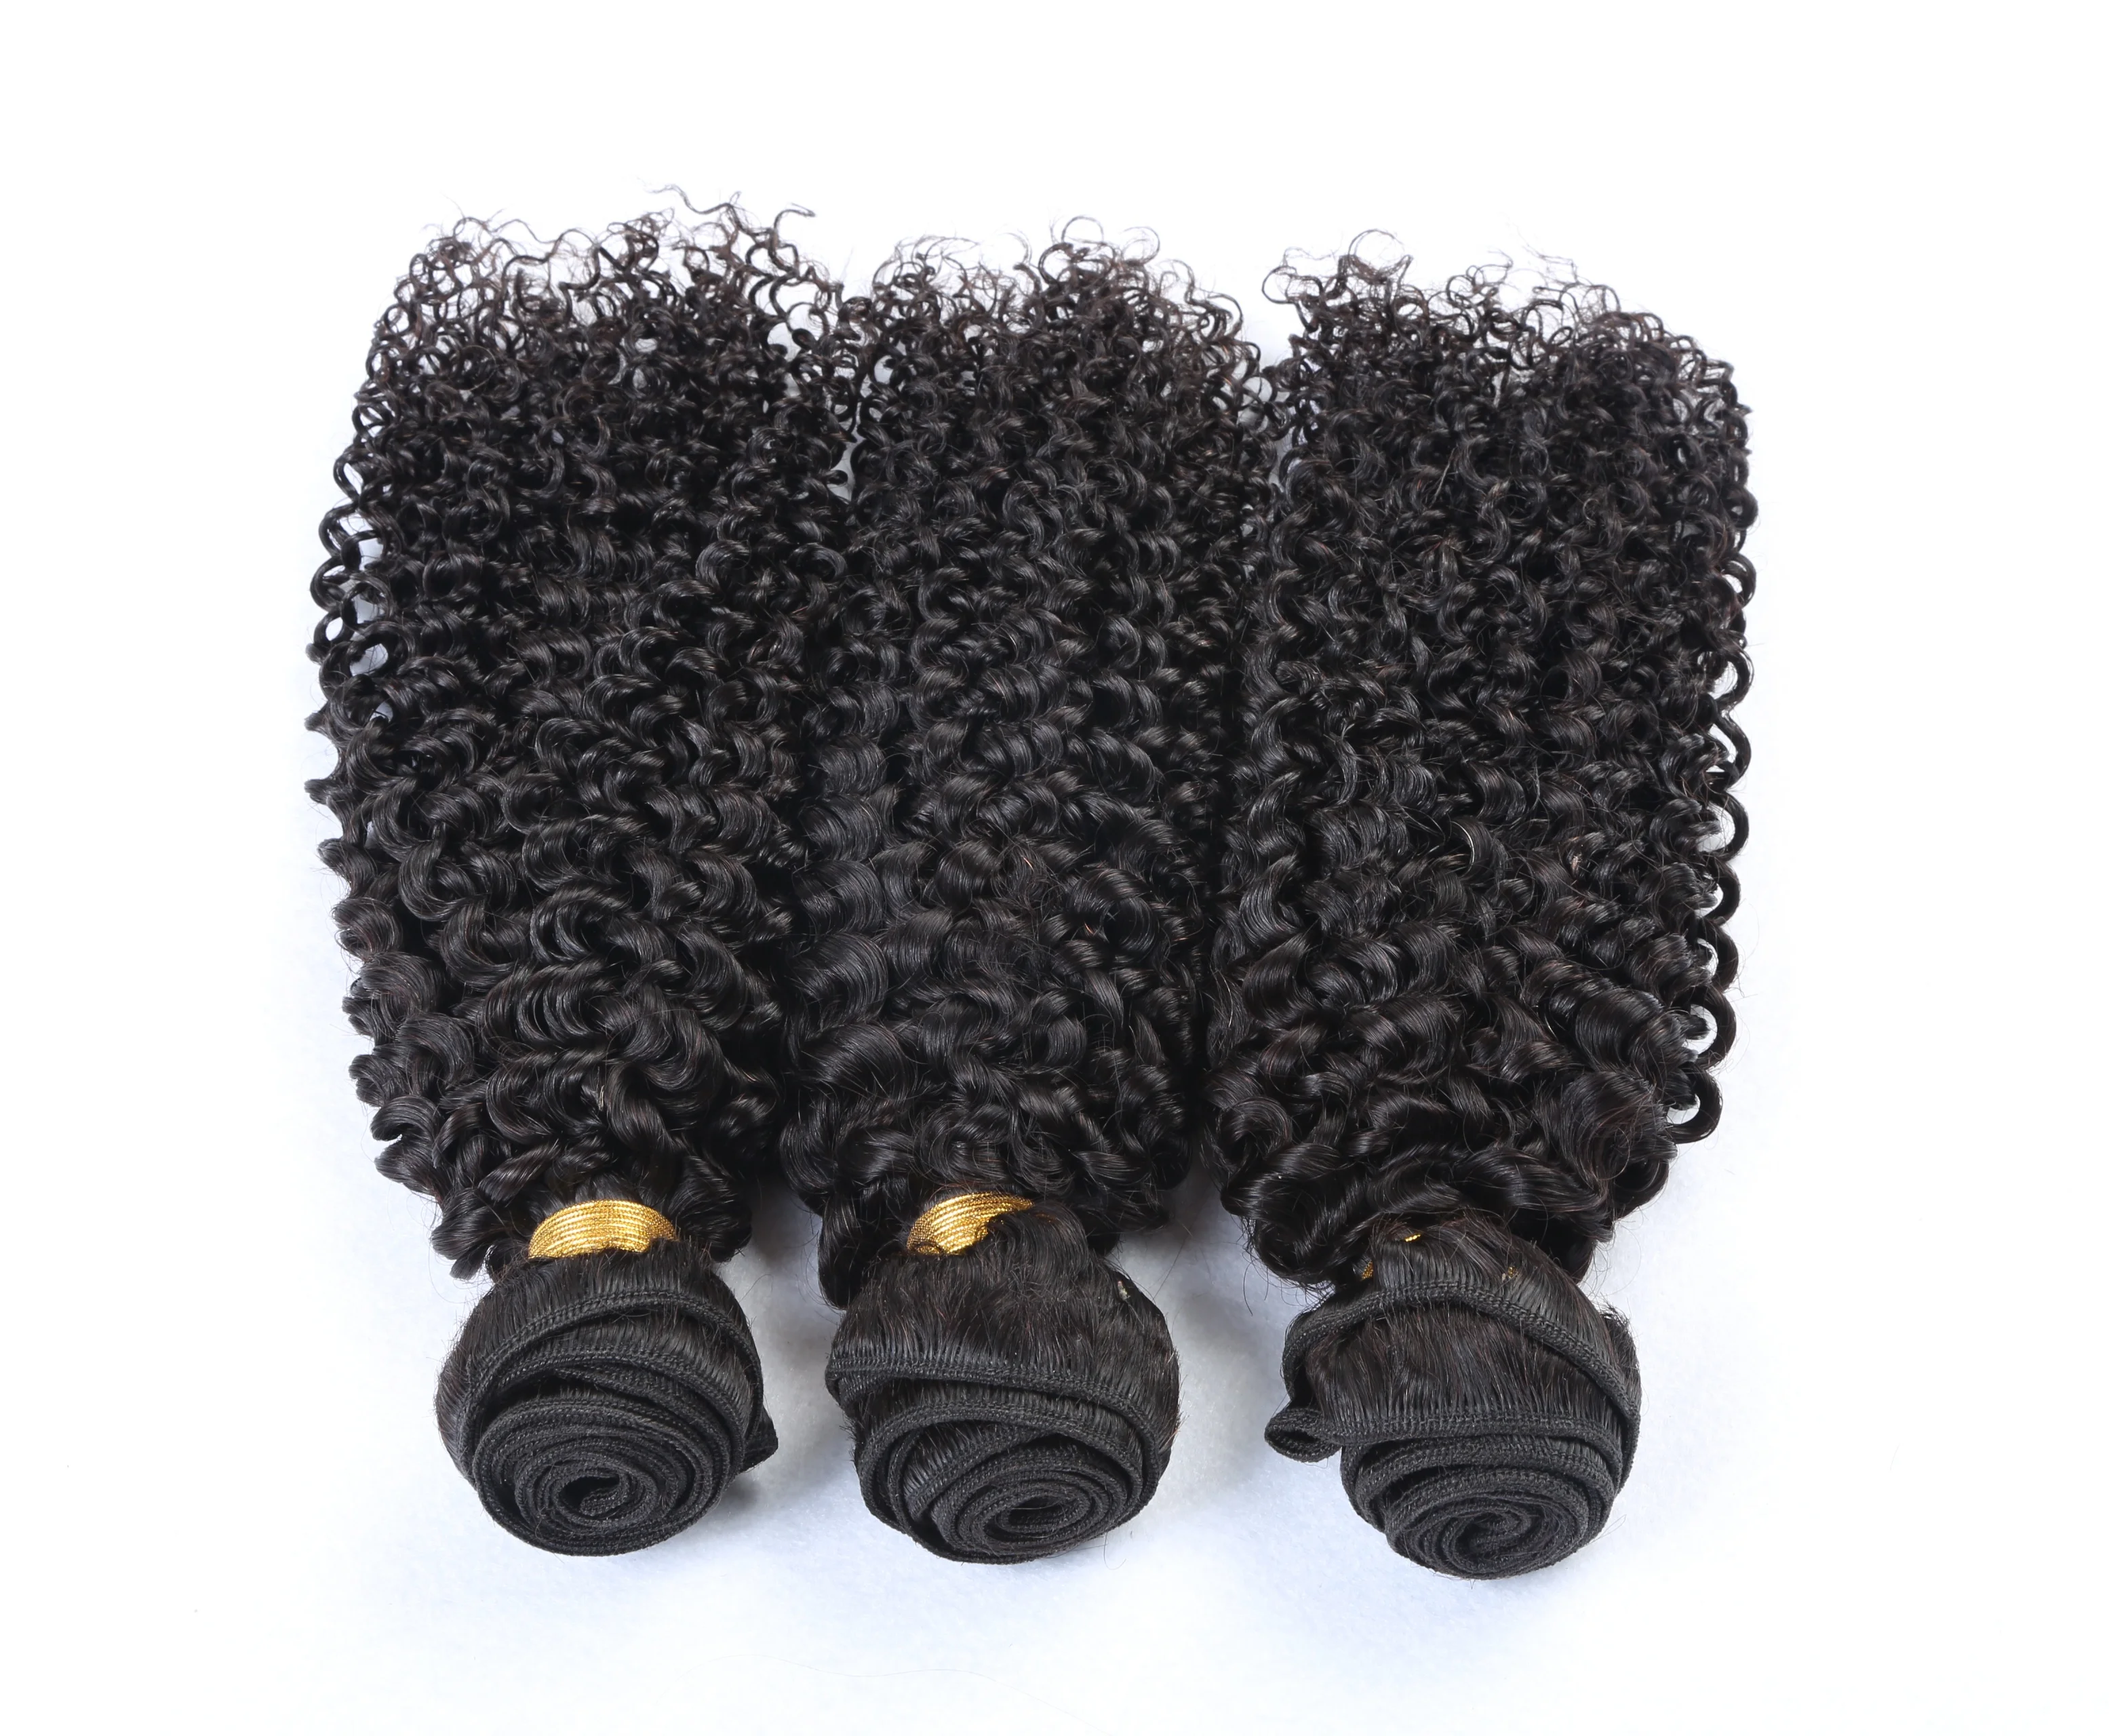 

Afro Kinky Curly Hair Extension Brazilian Hair raw remy virgin cuticle aligned Human Hair Natural Double Weft Weave, Narutal color